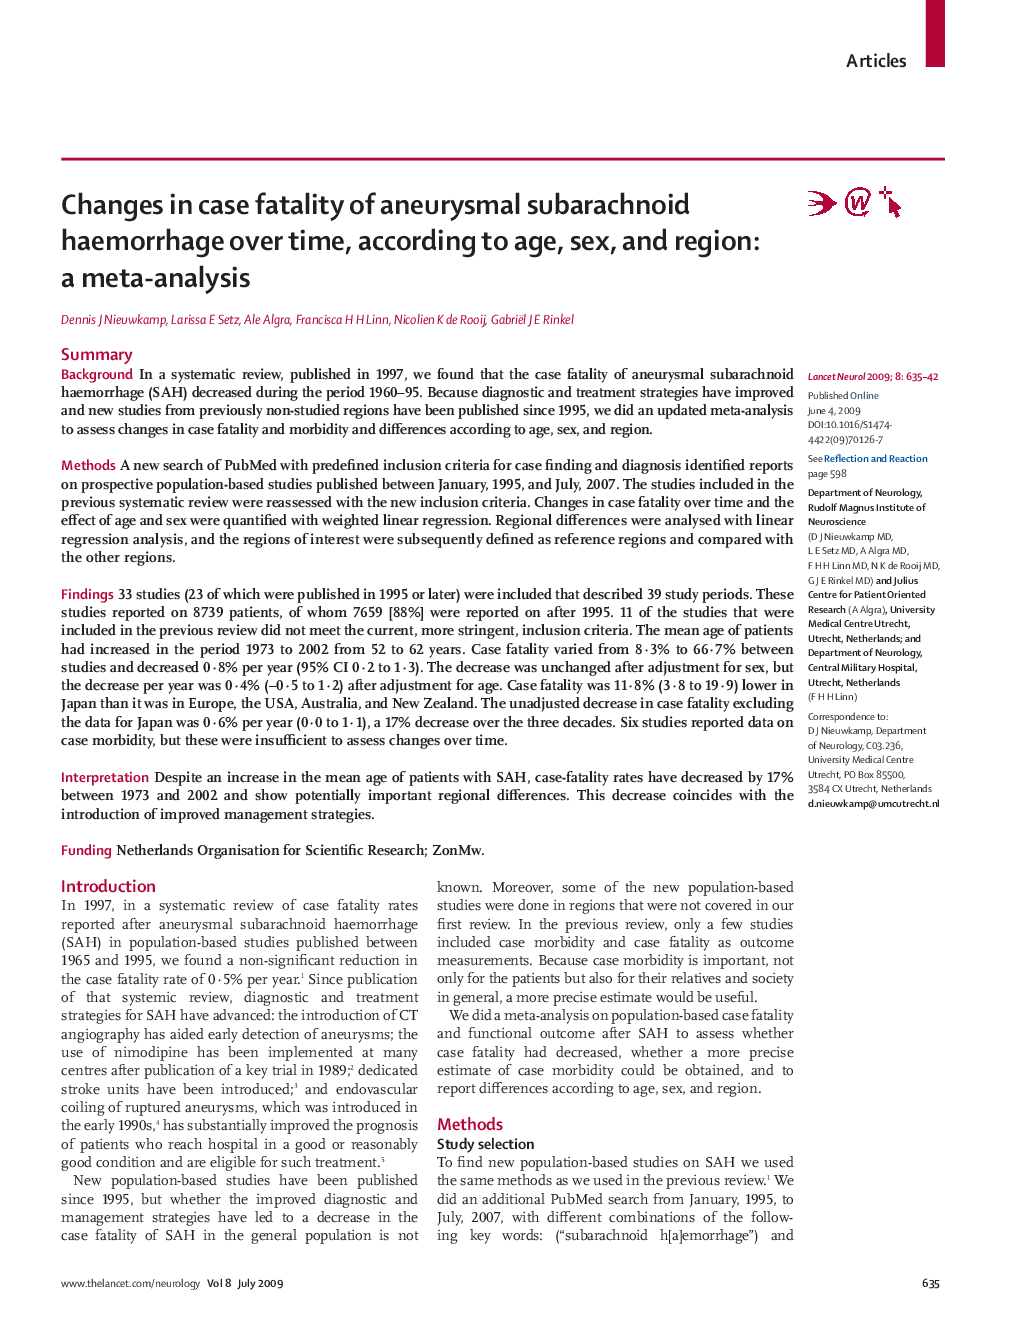 Changes in case fatality of aneurysmal subarachnoid haemorrhage over time, according to age, sex, and region: a meta-analysis